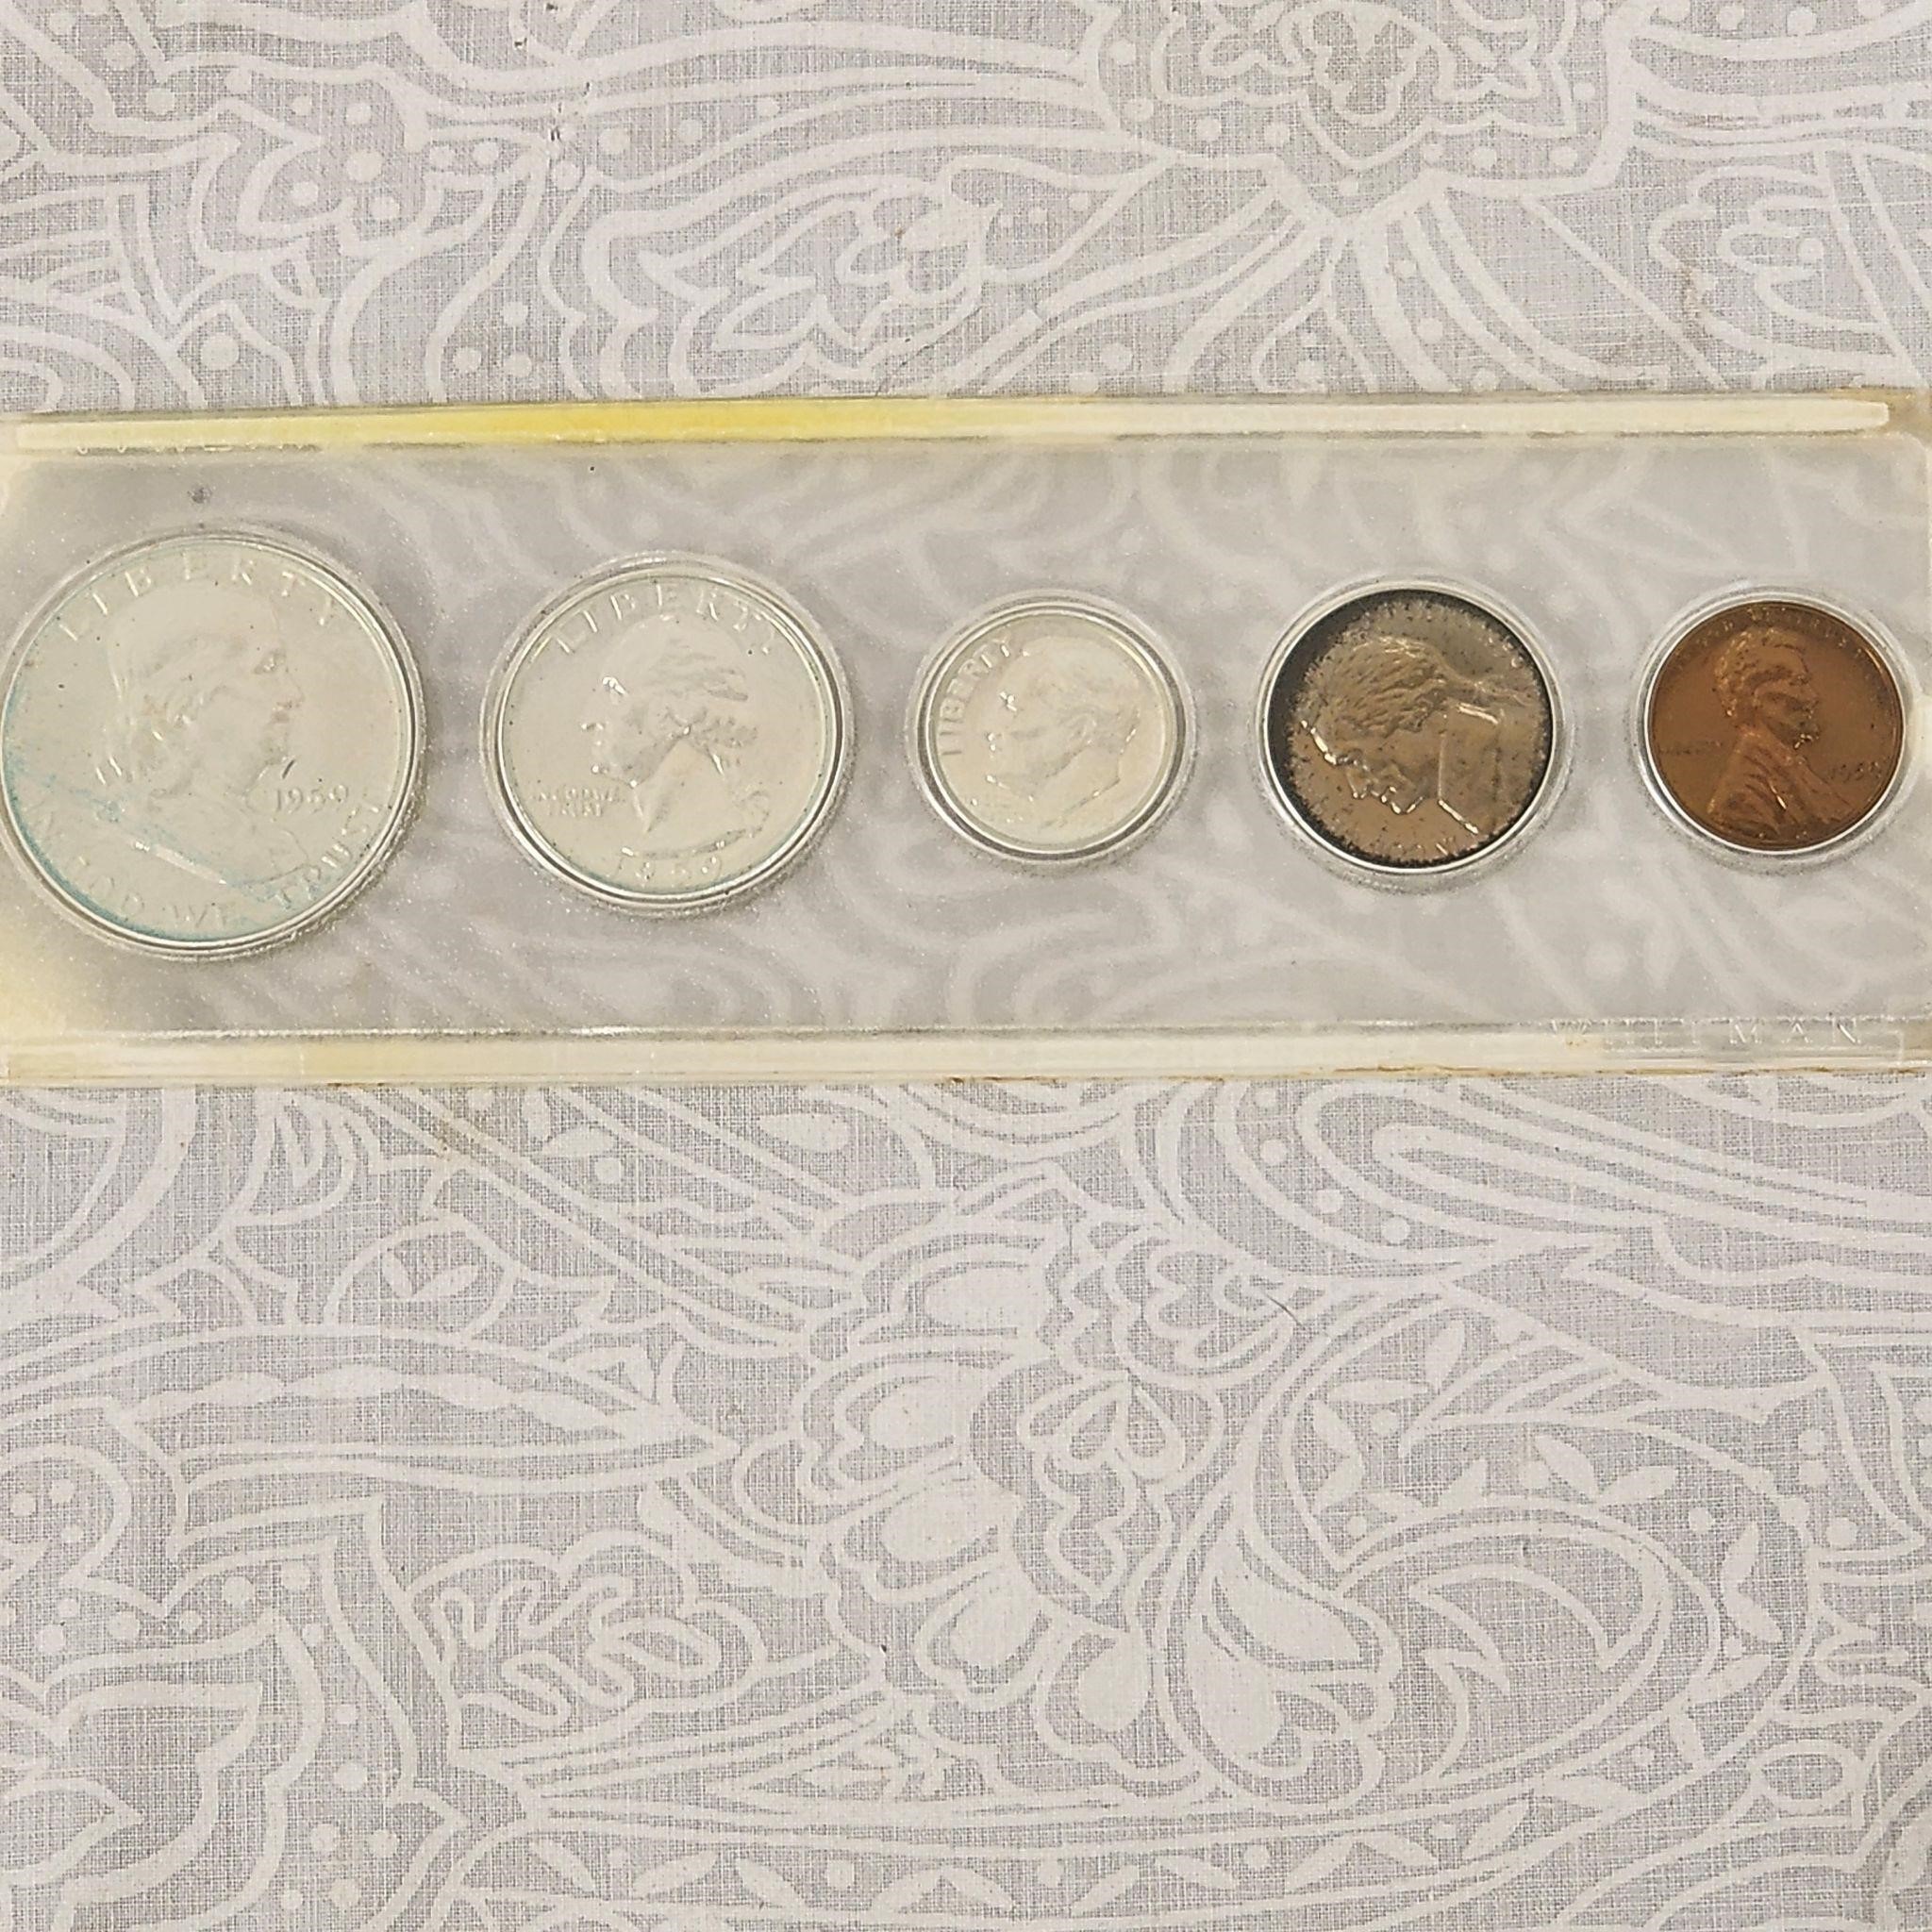 1959 Uncirculated Mint Set 90% Silver